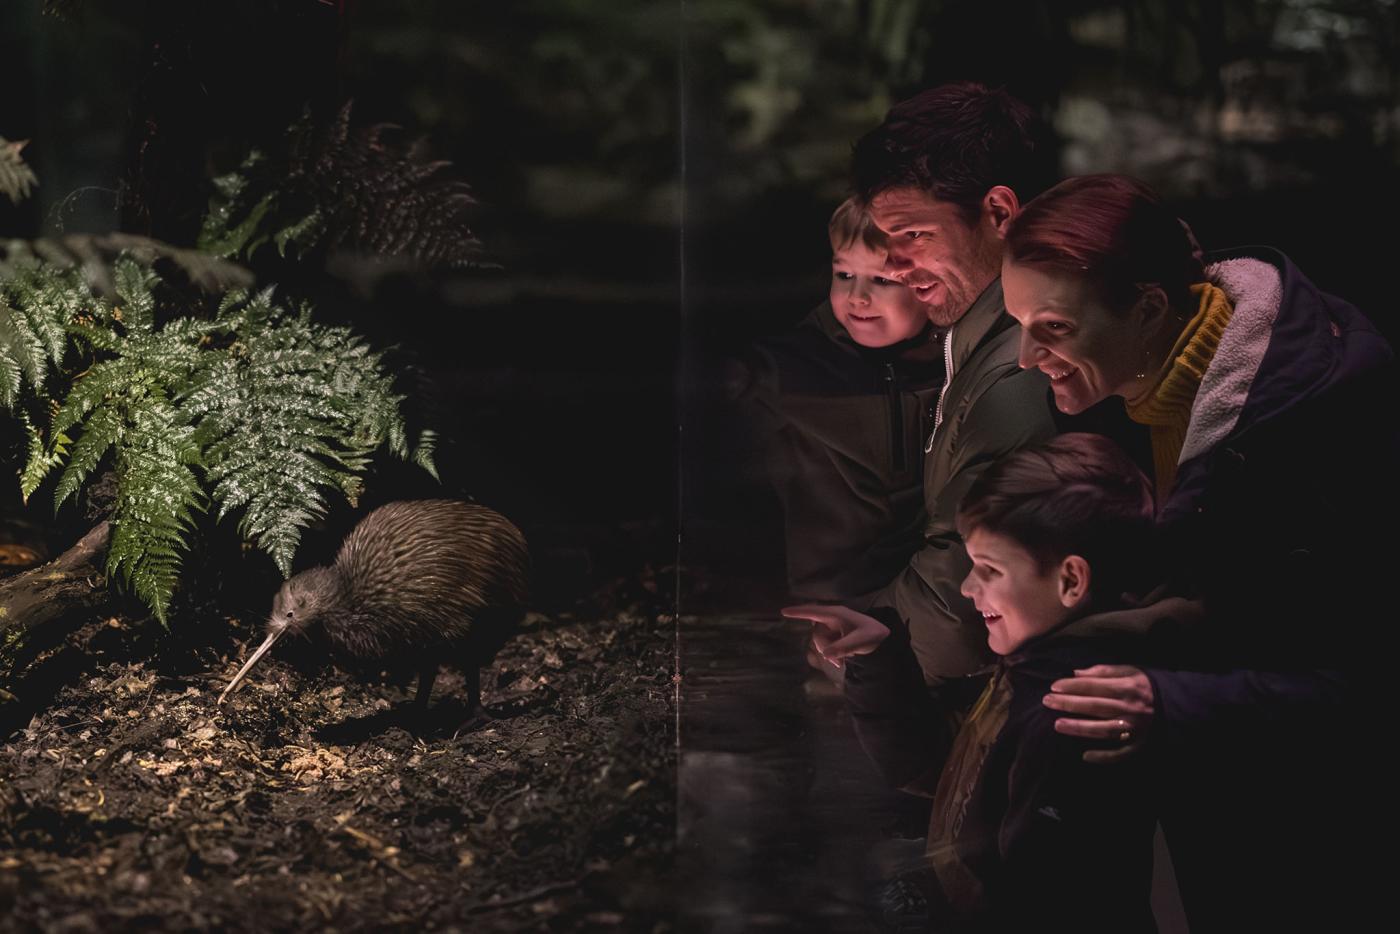 Family viewing a kiwi from behind glass